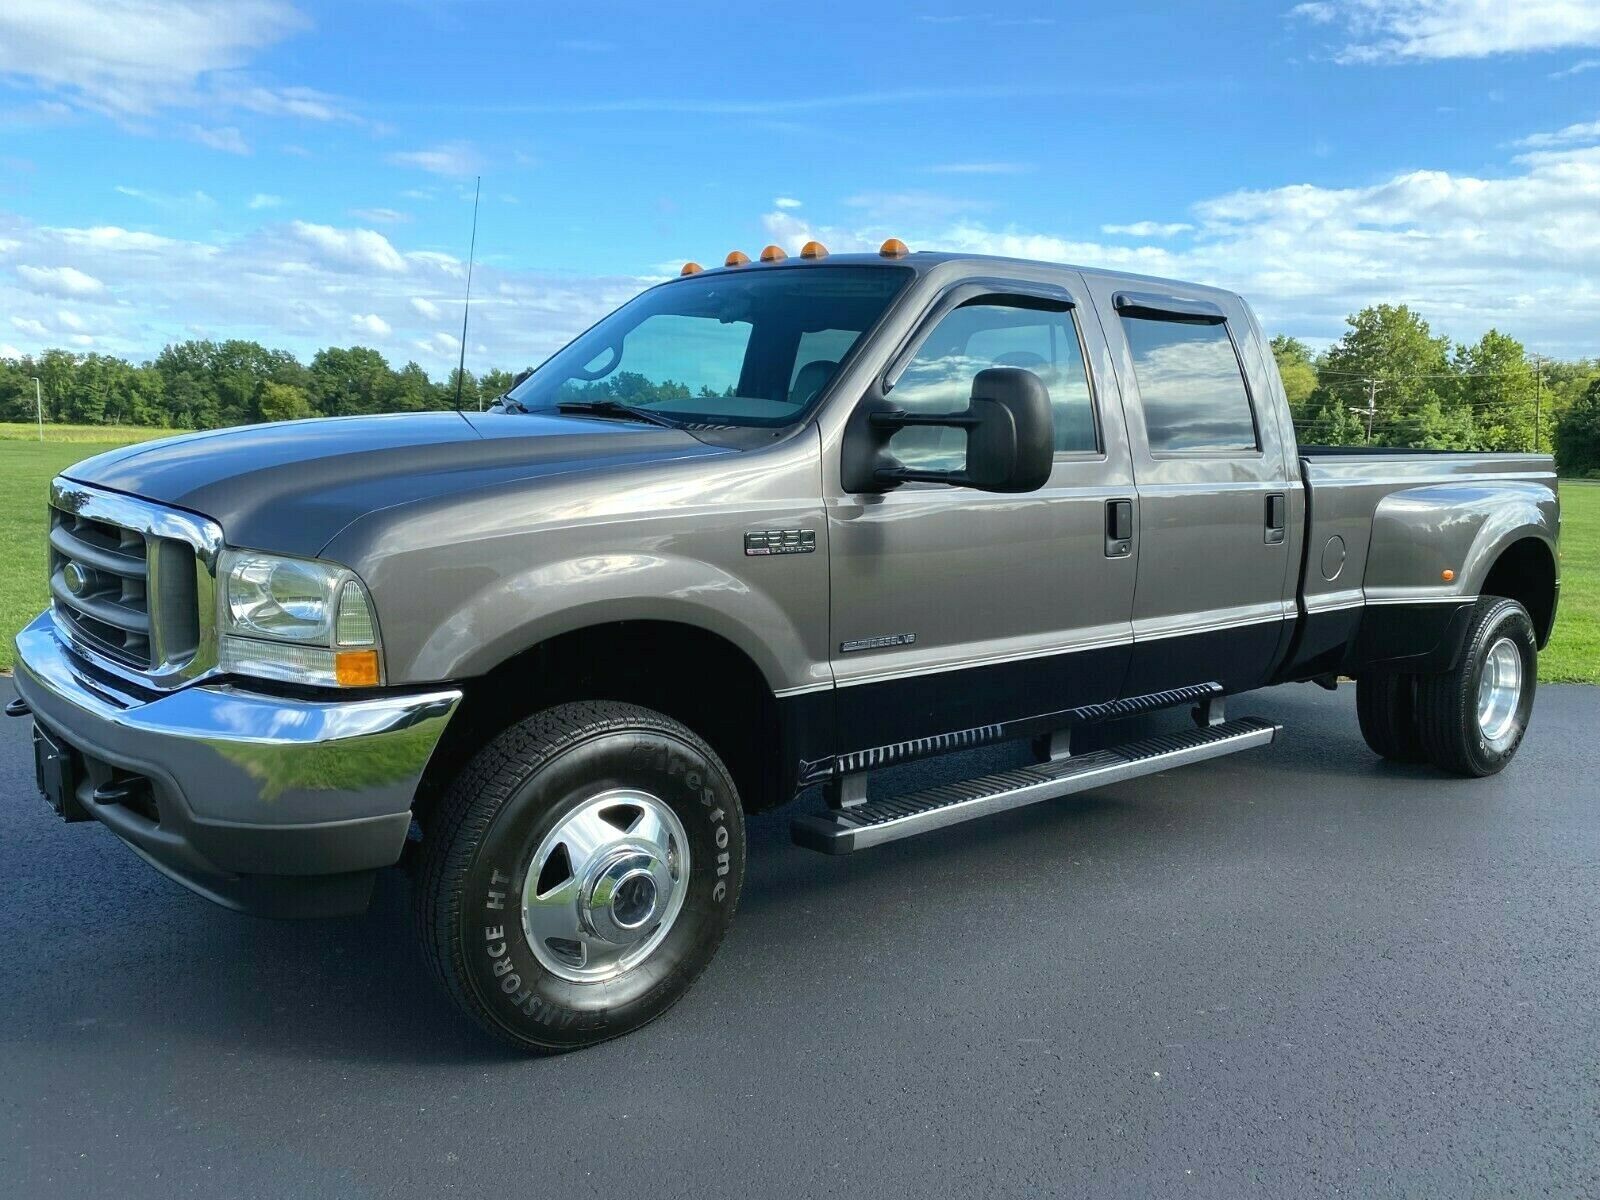 2002 Ford F-350 Lariat 7.3l Powerstroke Diesel 2002 Ford F350 Drw Lariat 7.3l Powerstroke Diesel 4x4 Low Miles Wow Buy It Now!